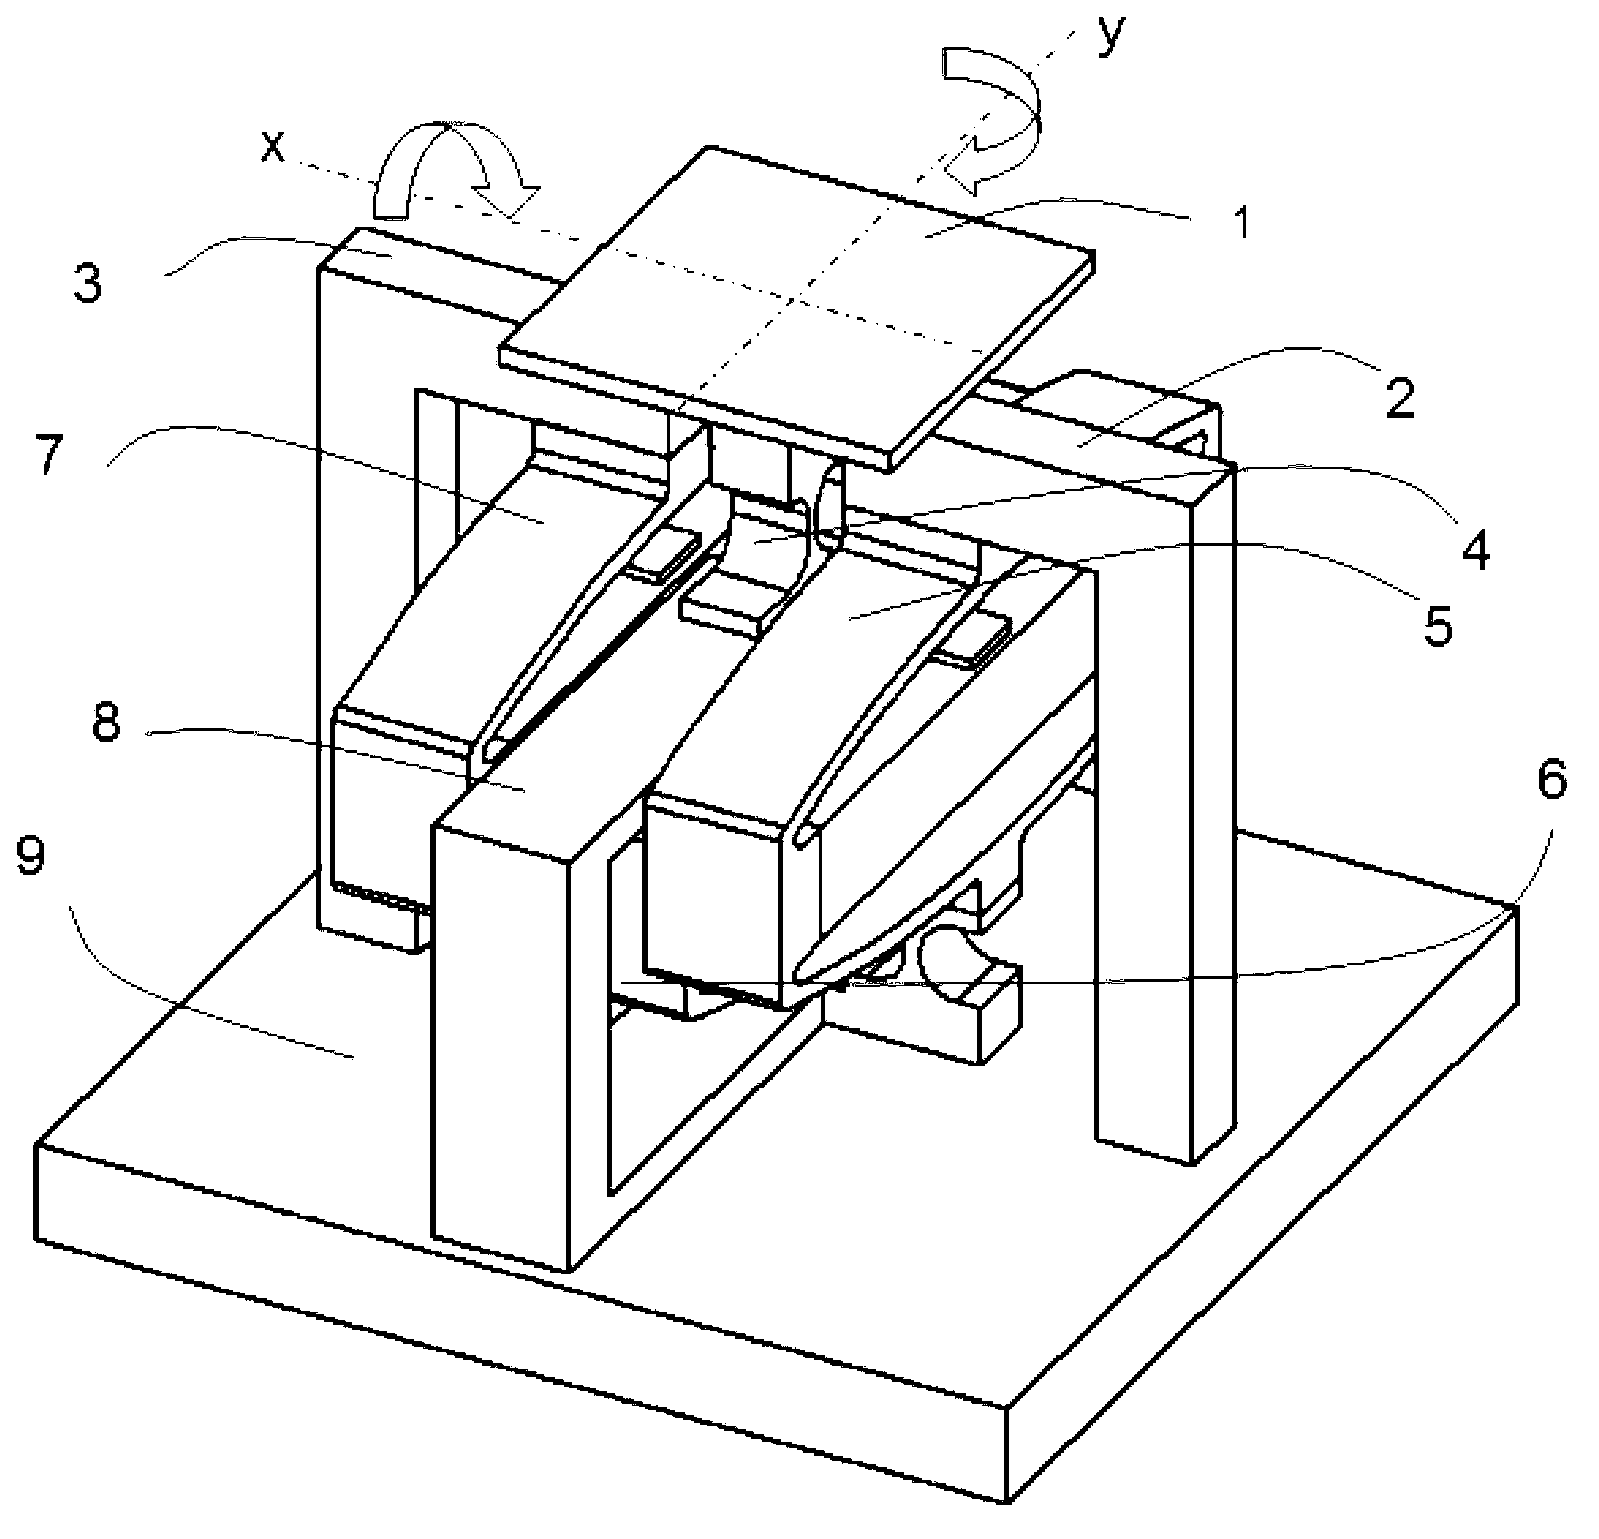 Two-dimensional quick control reflecting mirror